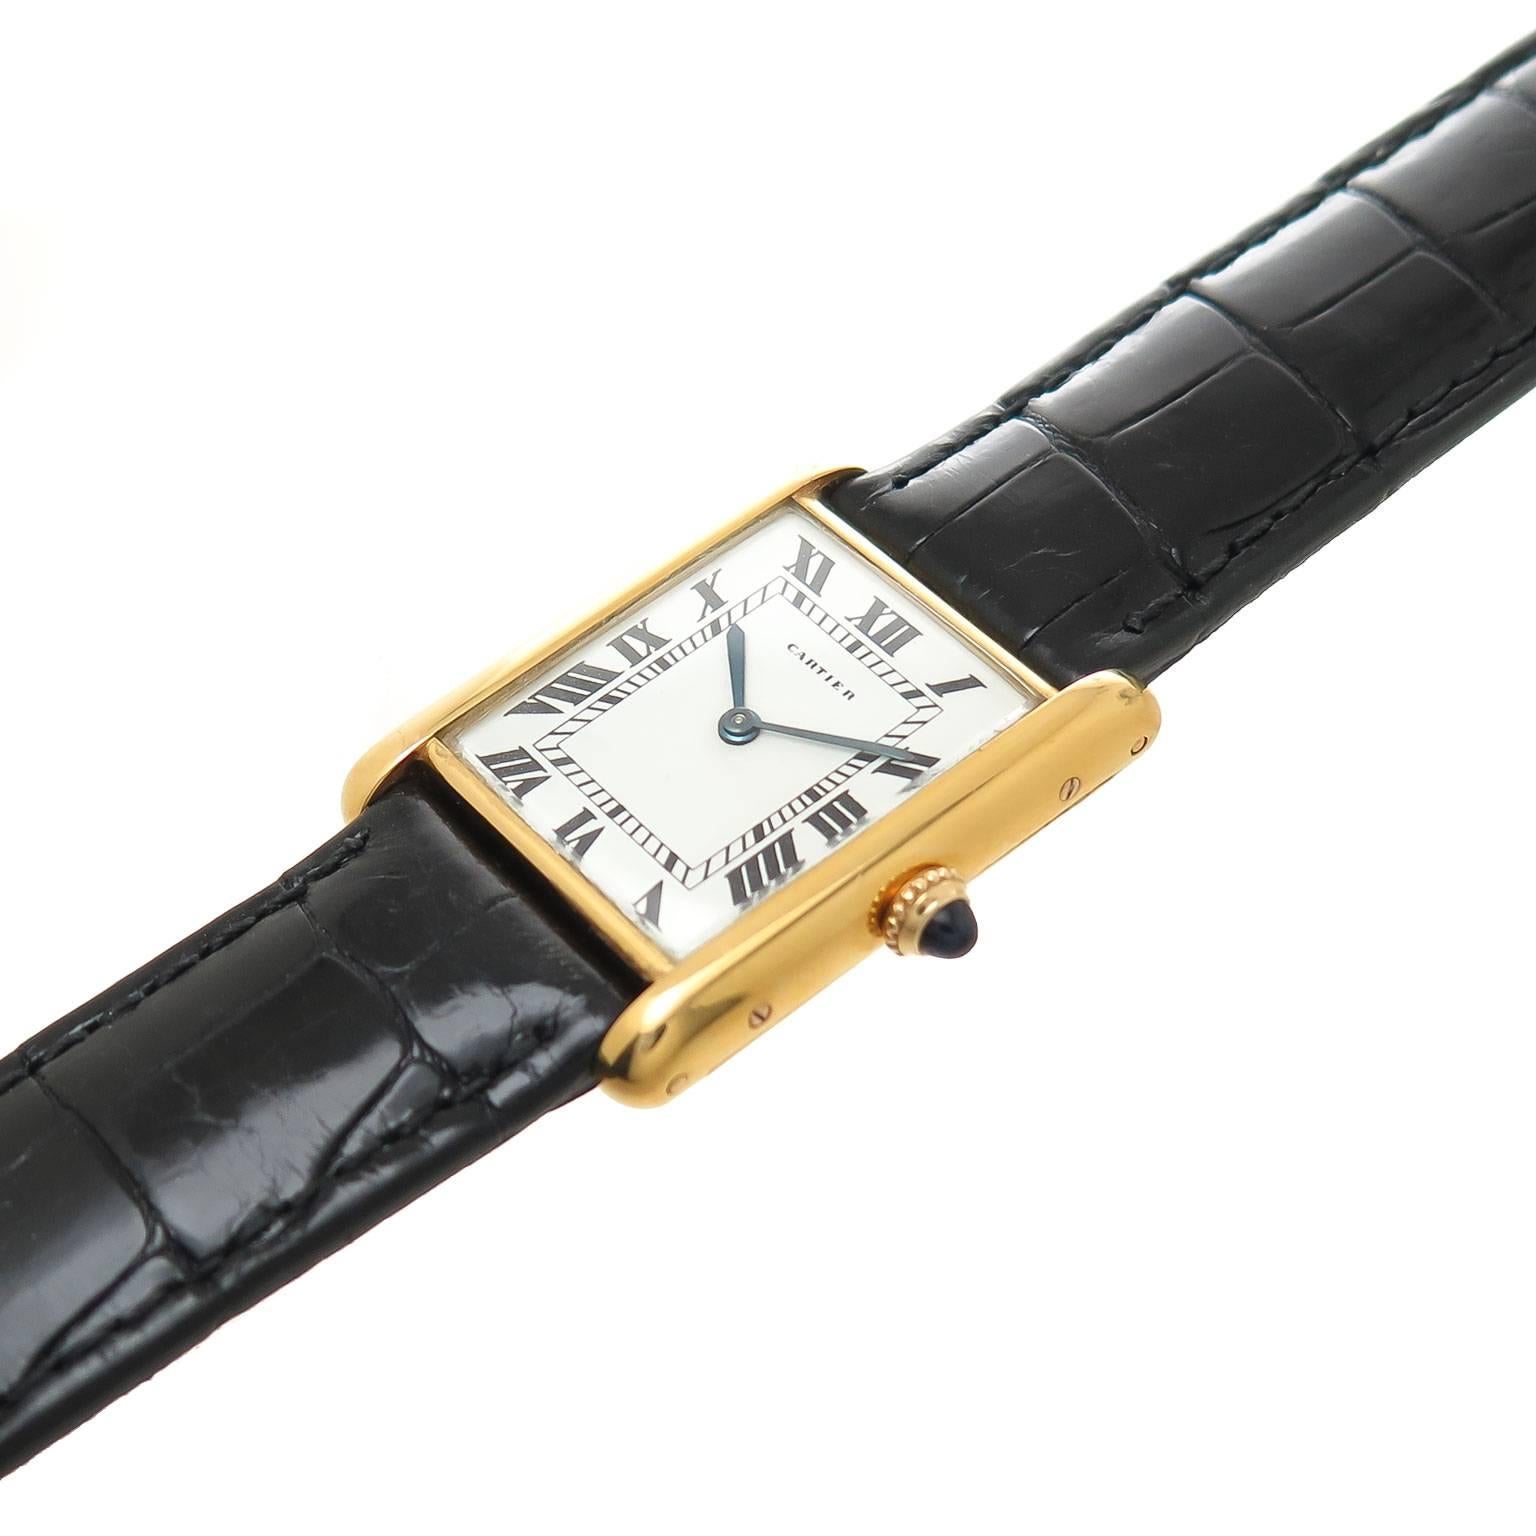 Circa 1980 Cartier Classic Tank wrist watch, 30 X 23 MM 18K yellow Gold Water Resistant case, mechanical, manual wind movement, white Dial with Black roman numerals, Sapphire crown. New, Black Padded Alligator Strap with Cartier Gold Plated Tang